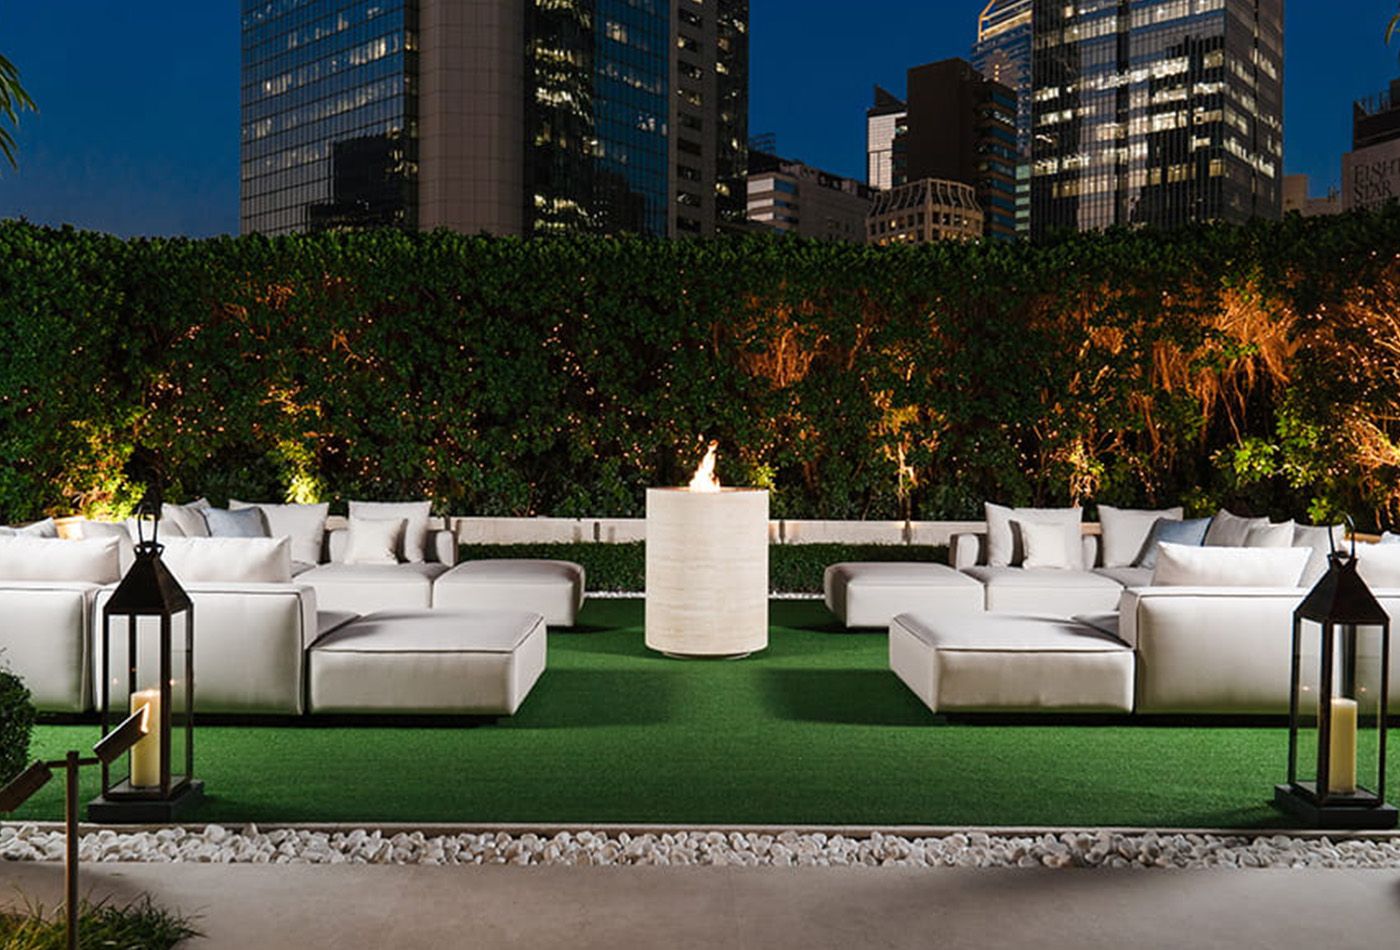 Rooftop bar with lawn, plants and sky scrapers in the distance